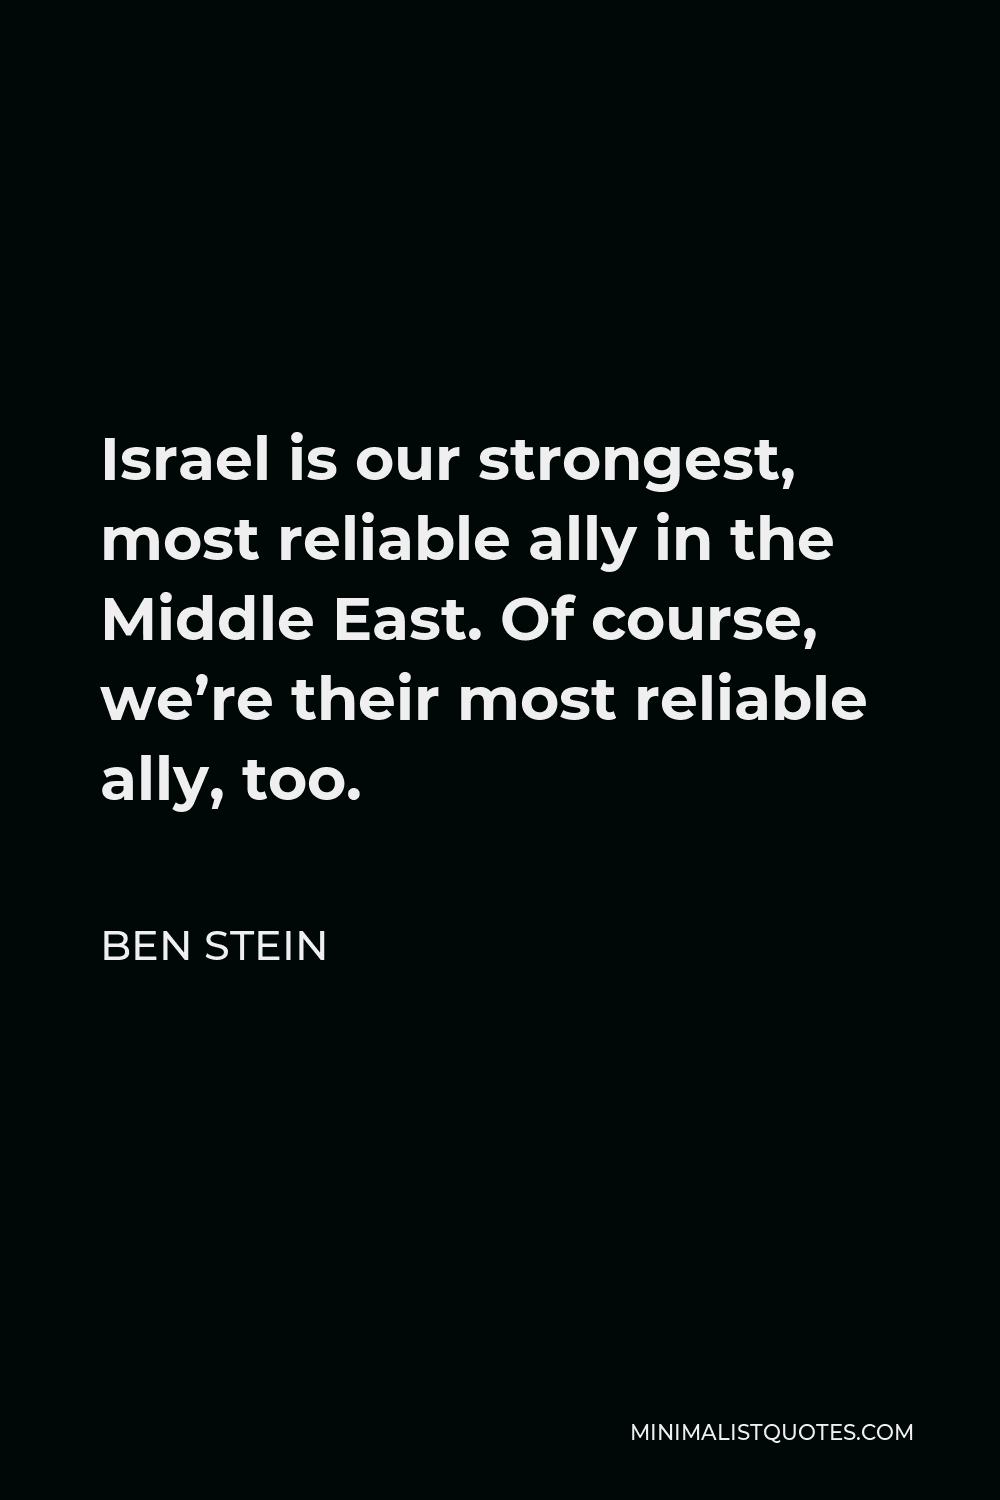 Ben Stein Quote - Israel is our strongest, most reliable ally in the Middle East. Of course, we’re their most reliable ally, too.